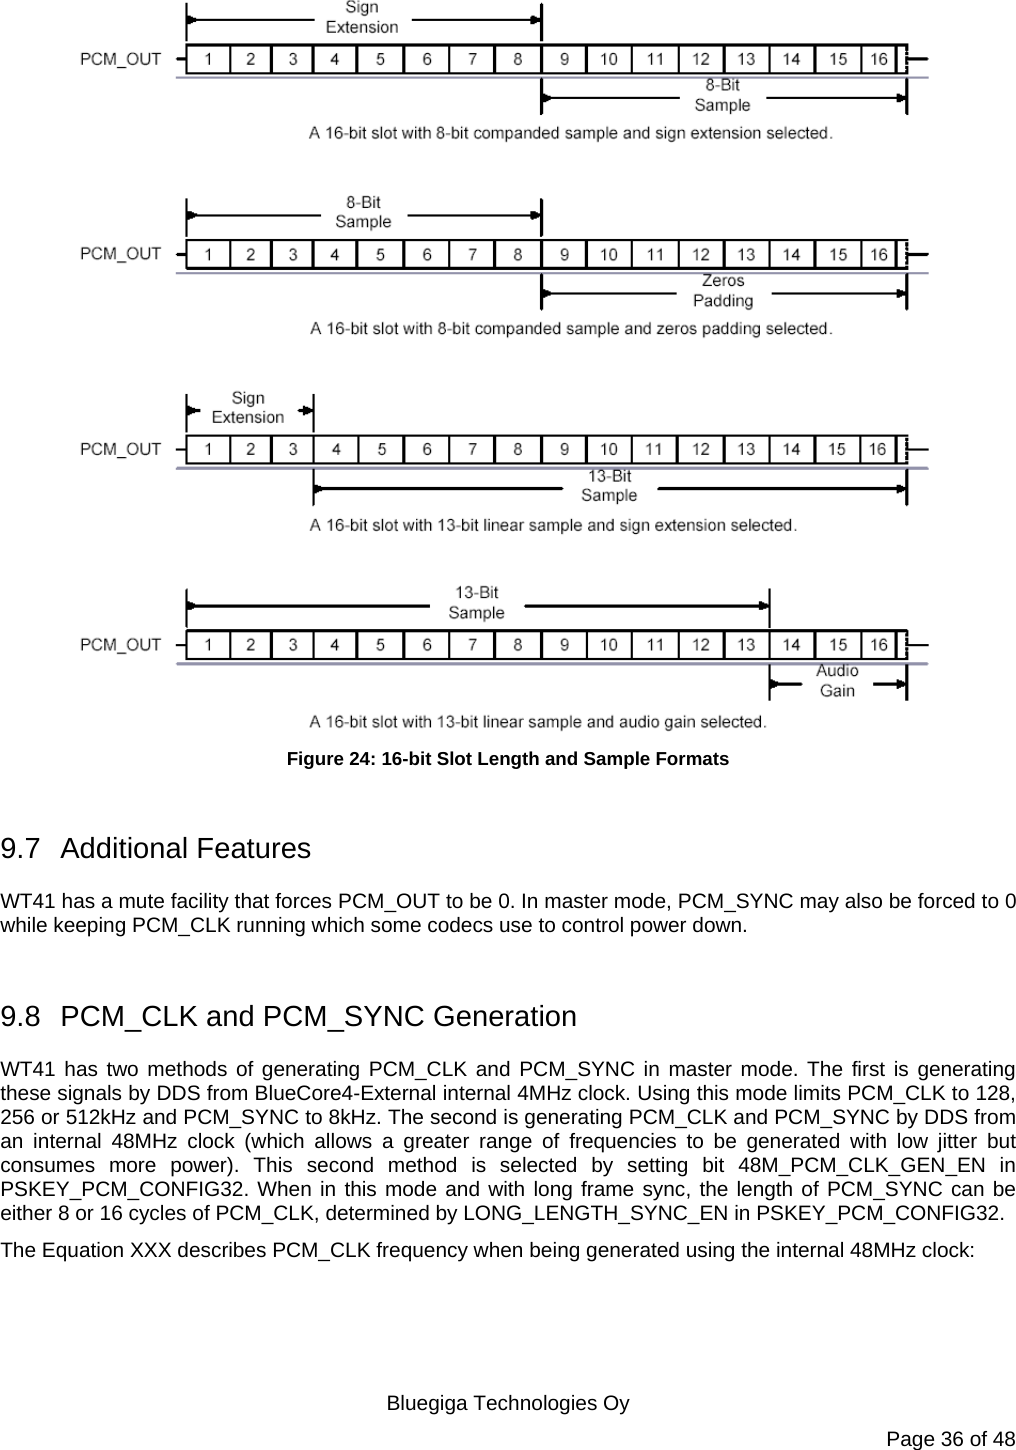   Bluegiga Technologies Oy Page 36 of 48  Figure 24: 16-bit Slot Length and Sample Formats  9.7 Additional Features WT41 has a mute facility that forces PCM_OUT to be 0. In master mode, PCM_SYNC may also be forced to 0 while keeping PCM_CLK running which some codecs use to control power down.  9.8  PCM_CLK and PCM_SYNC Generation WT41 has two methods of generating PCM_CLK and PCM_SYNC in master mode. The first is generating these signals by DDS from BlueCore4-External internal 4MHz clock. Using this mode limits PCM_CLK to 128, 256 or 512kHz and PCM_SYNC to 8kHz. The second is generating PCM_CLK and PCM_SYNC by DDS from an internal 48MHz clock (which allows a greater range of frequencies to be generated with low jitter but consumes more power). This second method is selected by setting bit 48M_PCM_CLK_GEN_EN in PSKEY_PCM_CONFIG32. When in this mode and with long frame sync, the length of PCM_SYNC can be either 8 or 16 cycles of PCM_CLK, determined by LONG_LENGTH_SYNC_EN in PSKEY_PCM_CONFIG32. The Equation XXX describes PCM_CLK frequency when being generated using the internal 48MHz clock:  